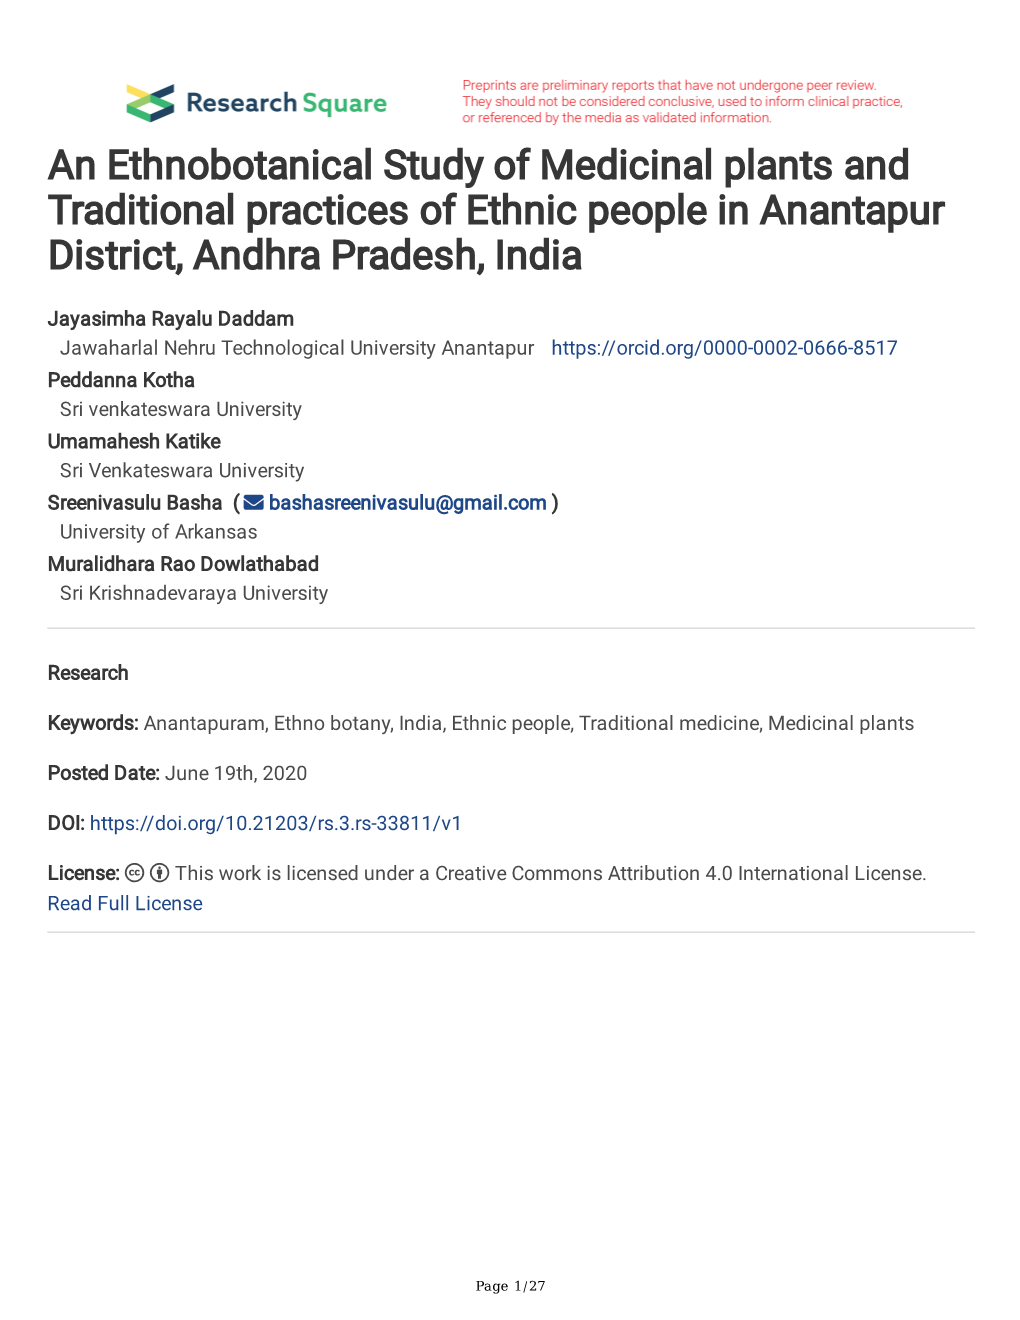 An Ethnobotanical Study of Medicinal Plants and Traditional Practices of Ethnic People in Anantapur District, Andhra Pradesh, India